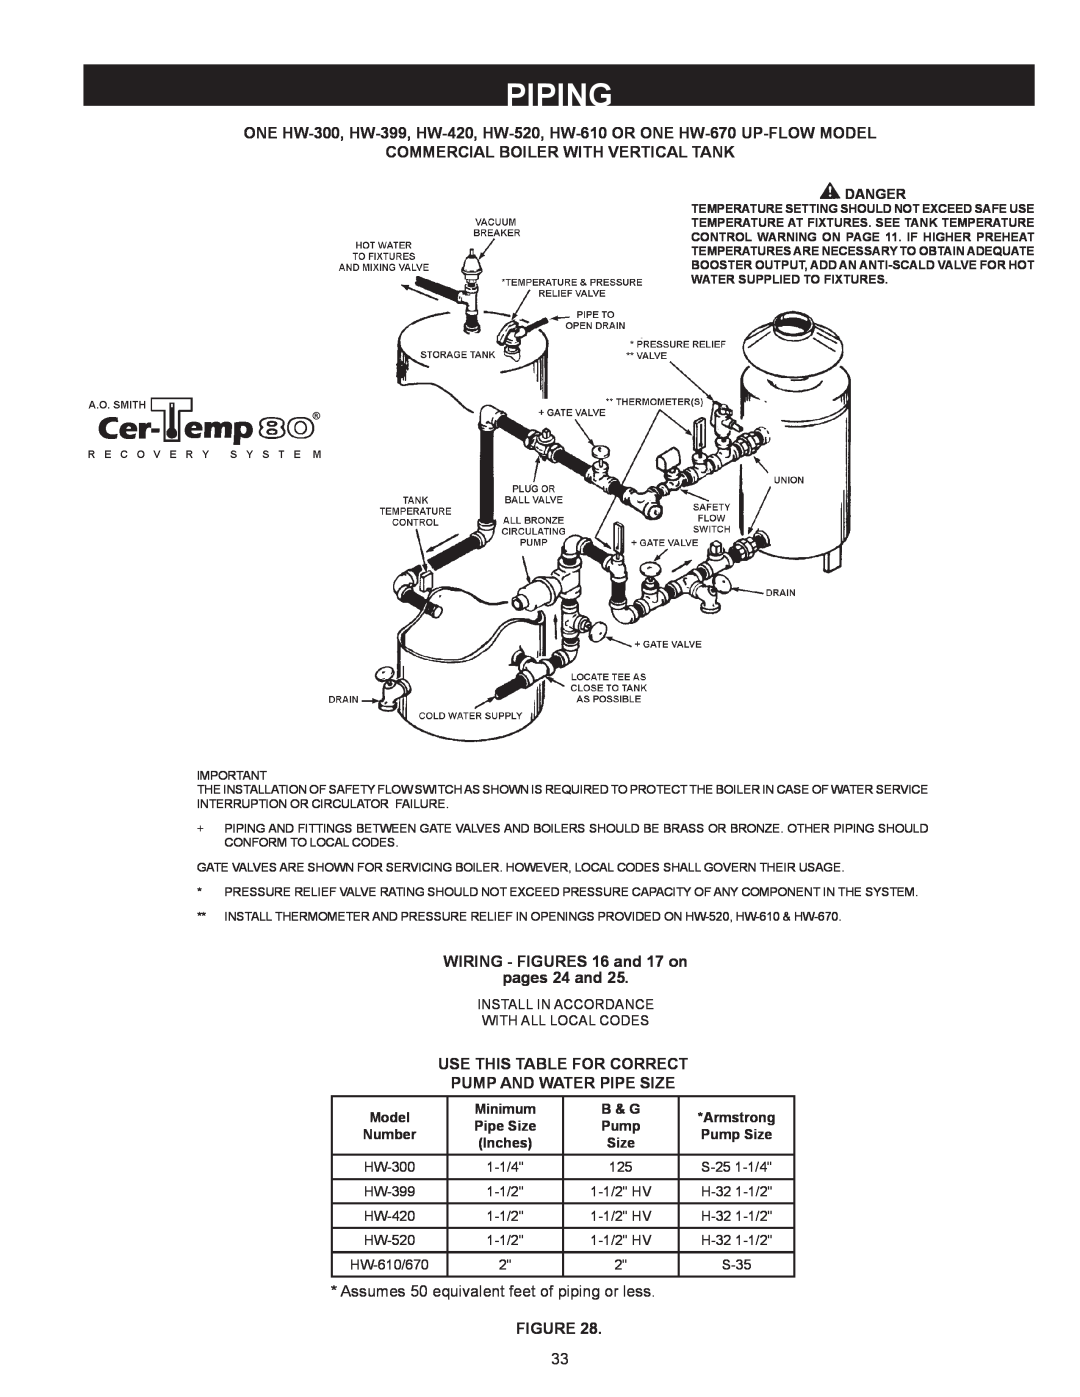 A.O. Smith HW 610 warranty Piping, Commercial Boiler With Vertical Tank, WIRING - FIGURES 16 and 17 on pages 24 and 